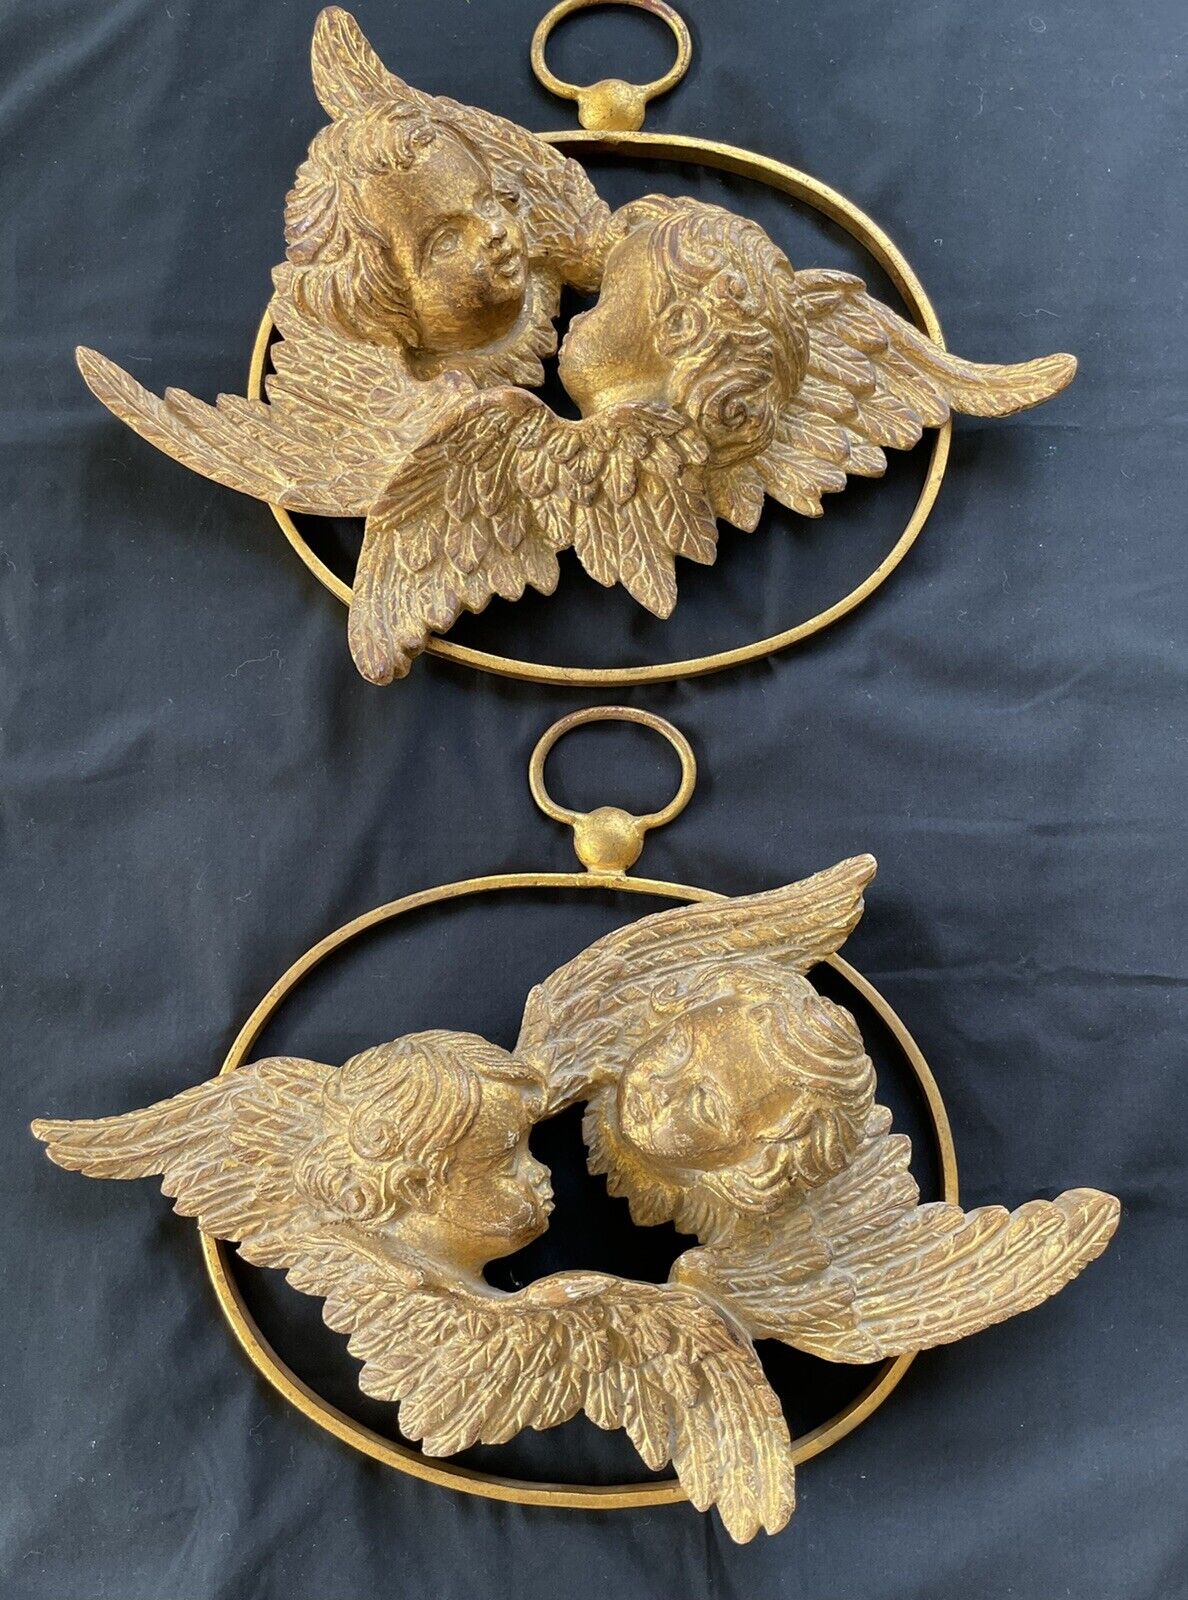 STUNNING TWO ANTIQUE ITALIAN PALADIO HANDCARVED WALL WOODEN PANEL ANGELS PUTTI